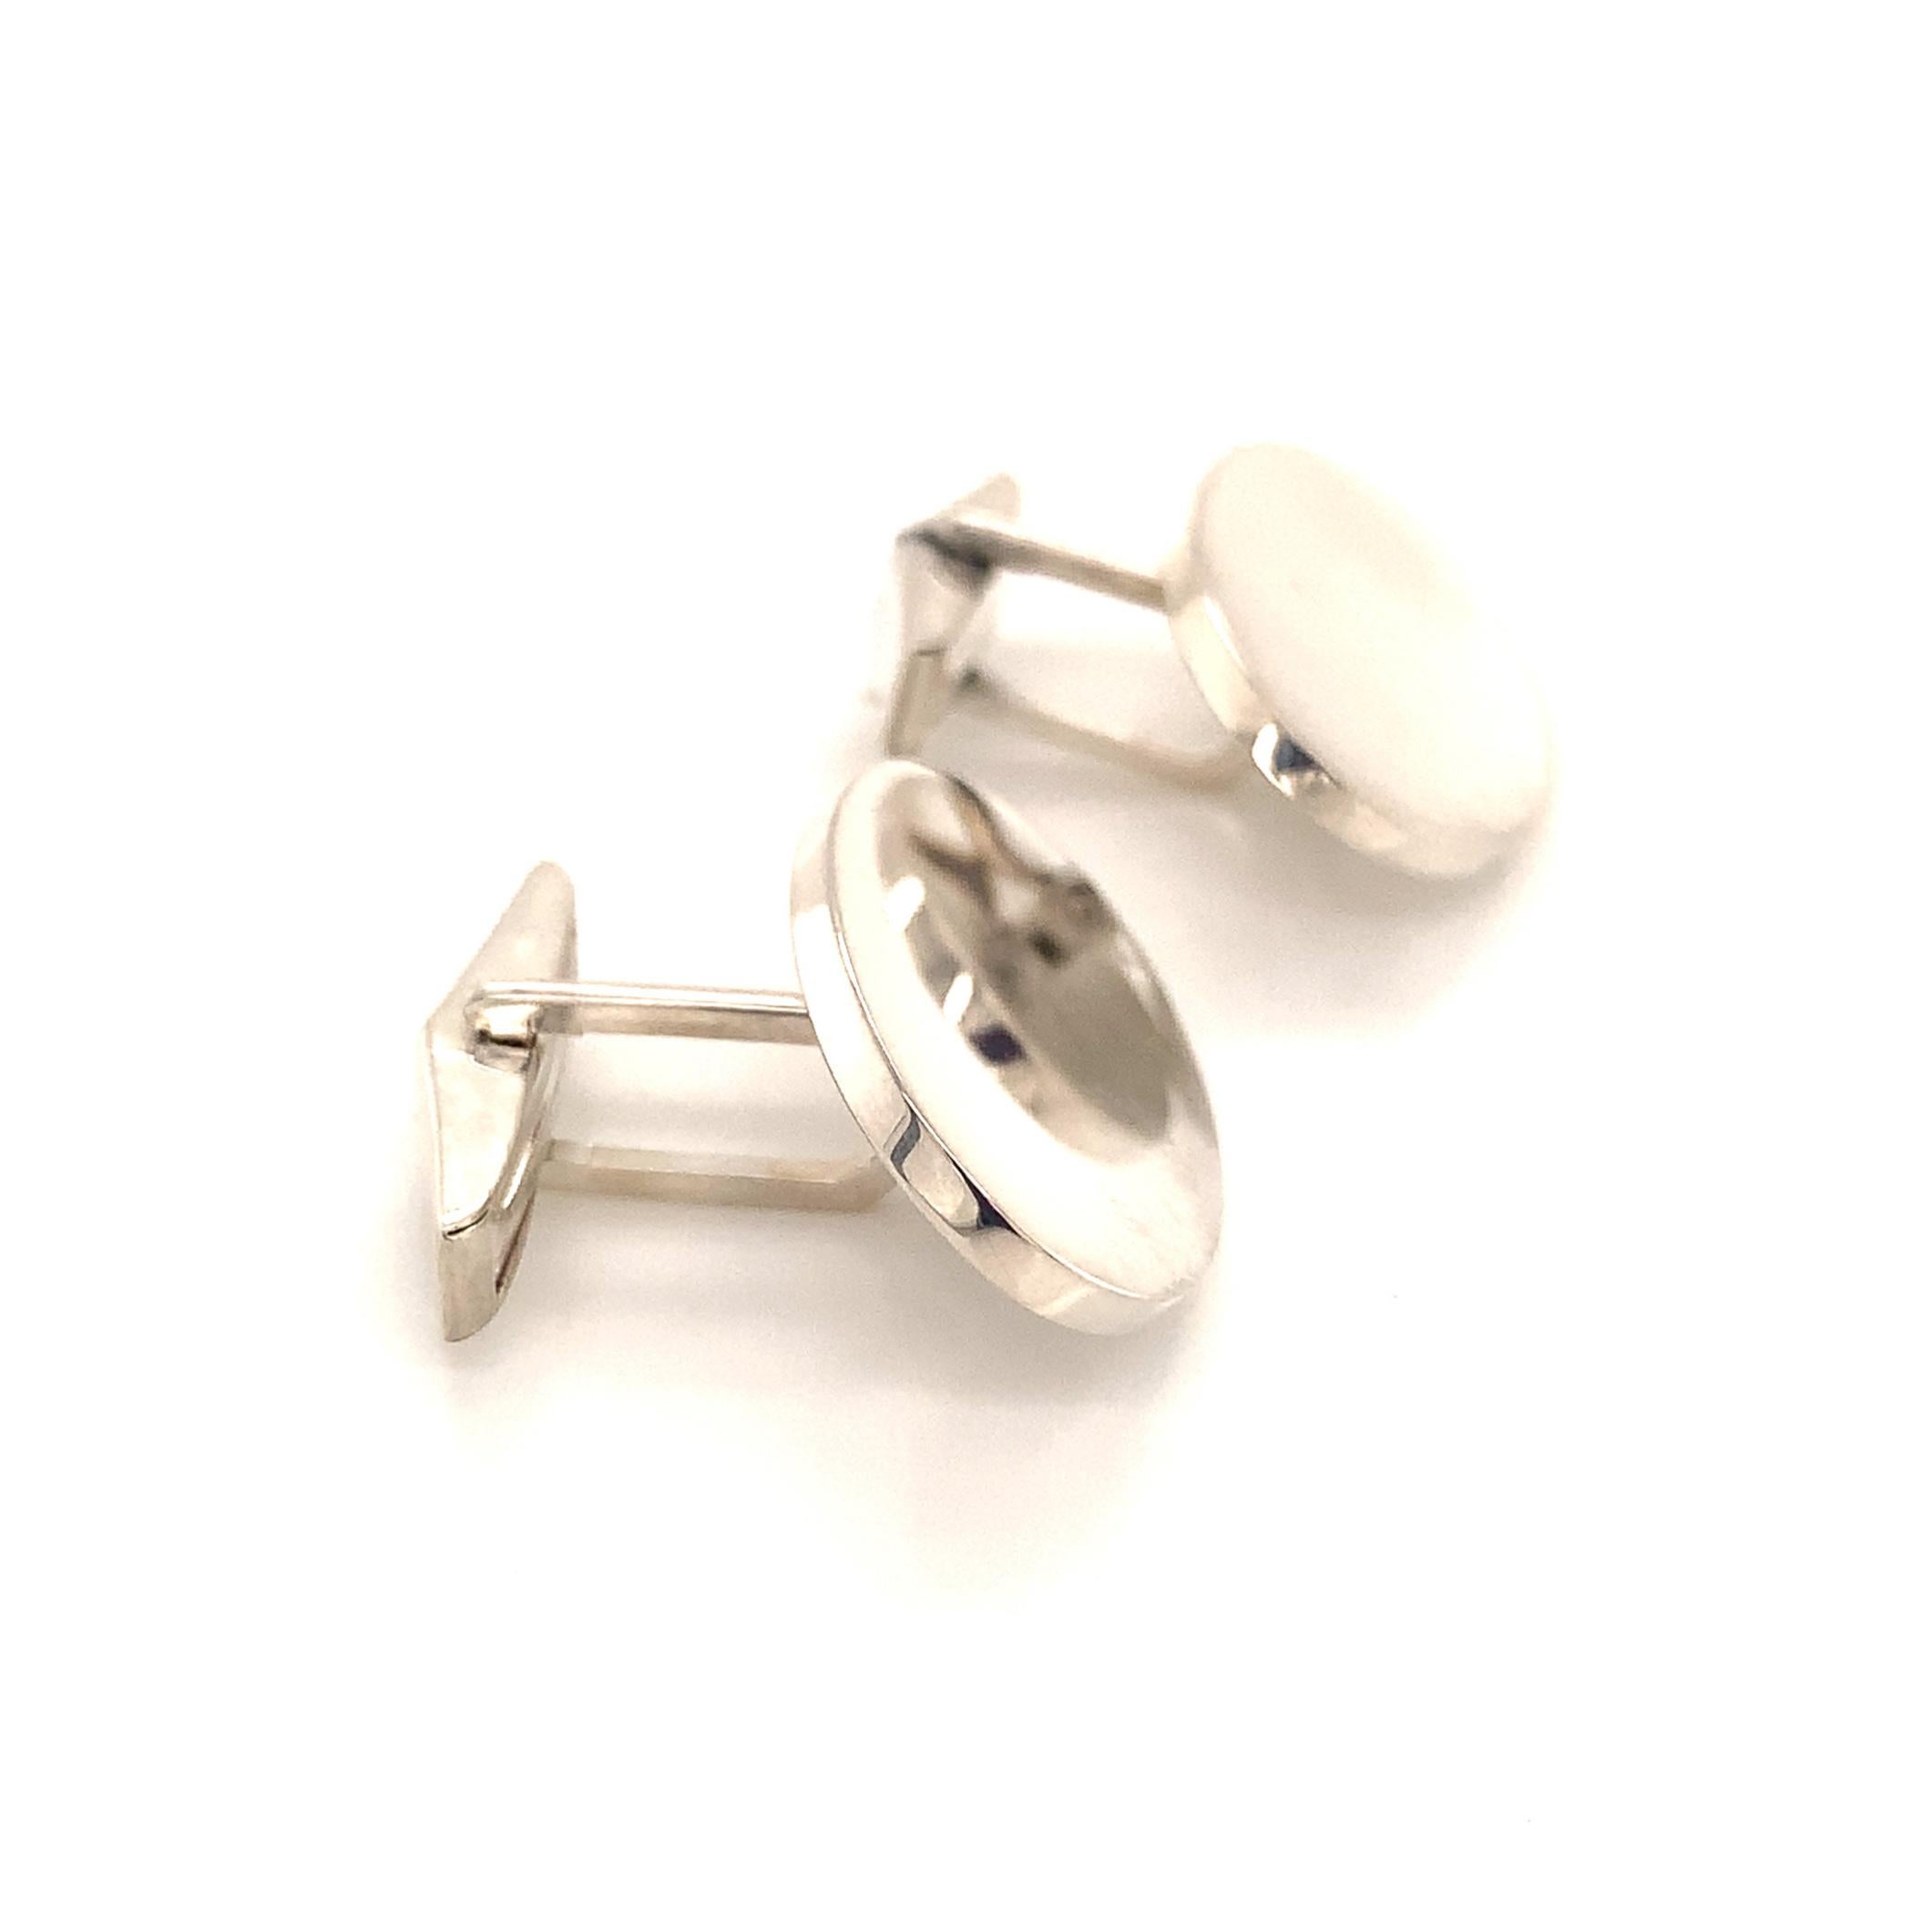 Tiffany & Co Estate Sterling Silver Extra Wide Oval Cufflinks 18 Grams TIF629

These elegant Authentic Tiffany & Co Men's Cufflinks are made of sterling silver and have a weight of 18 grams.

TRUSTED SELLER SINCE 2002

PLEASE SEE OUR HUNDREDS OF